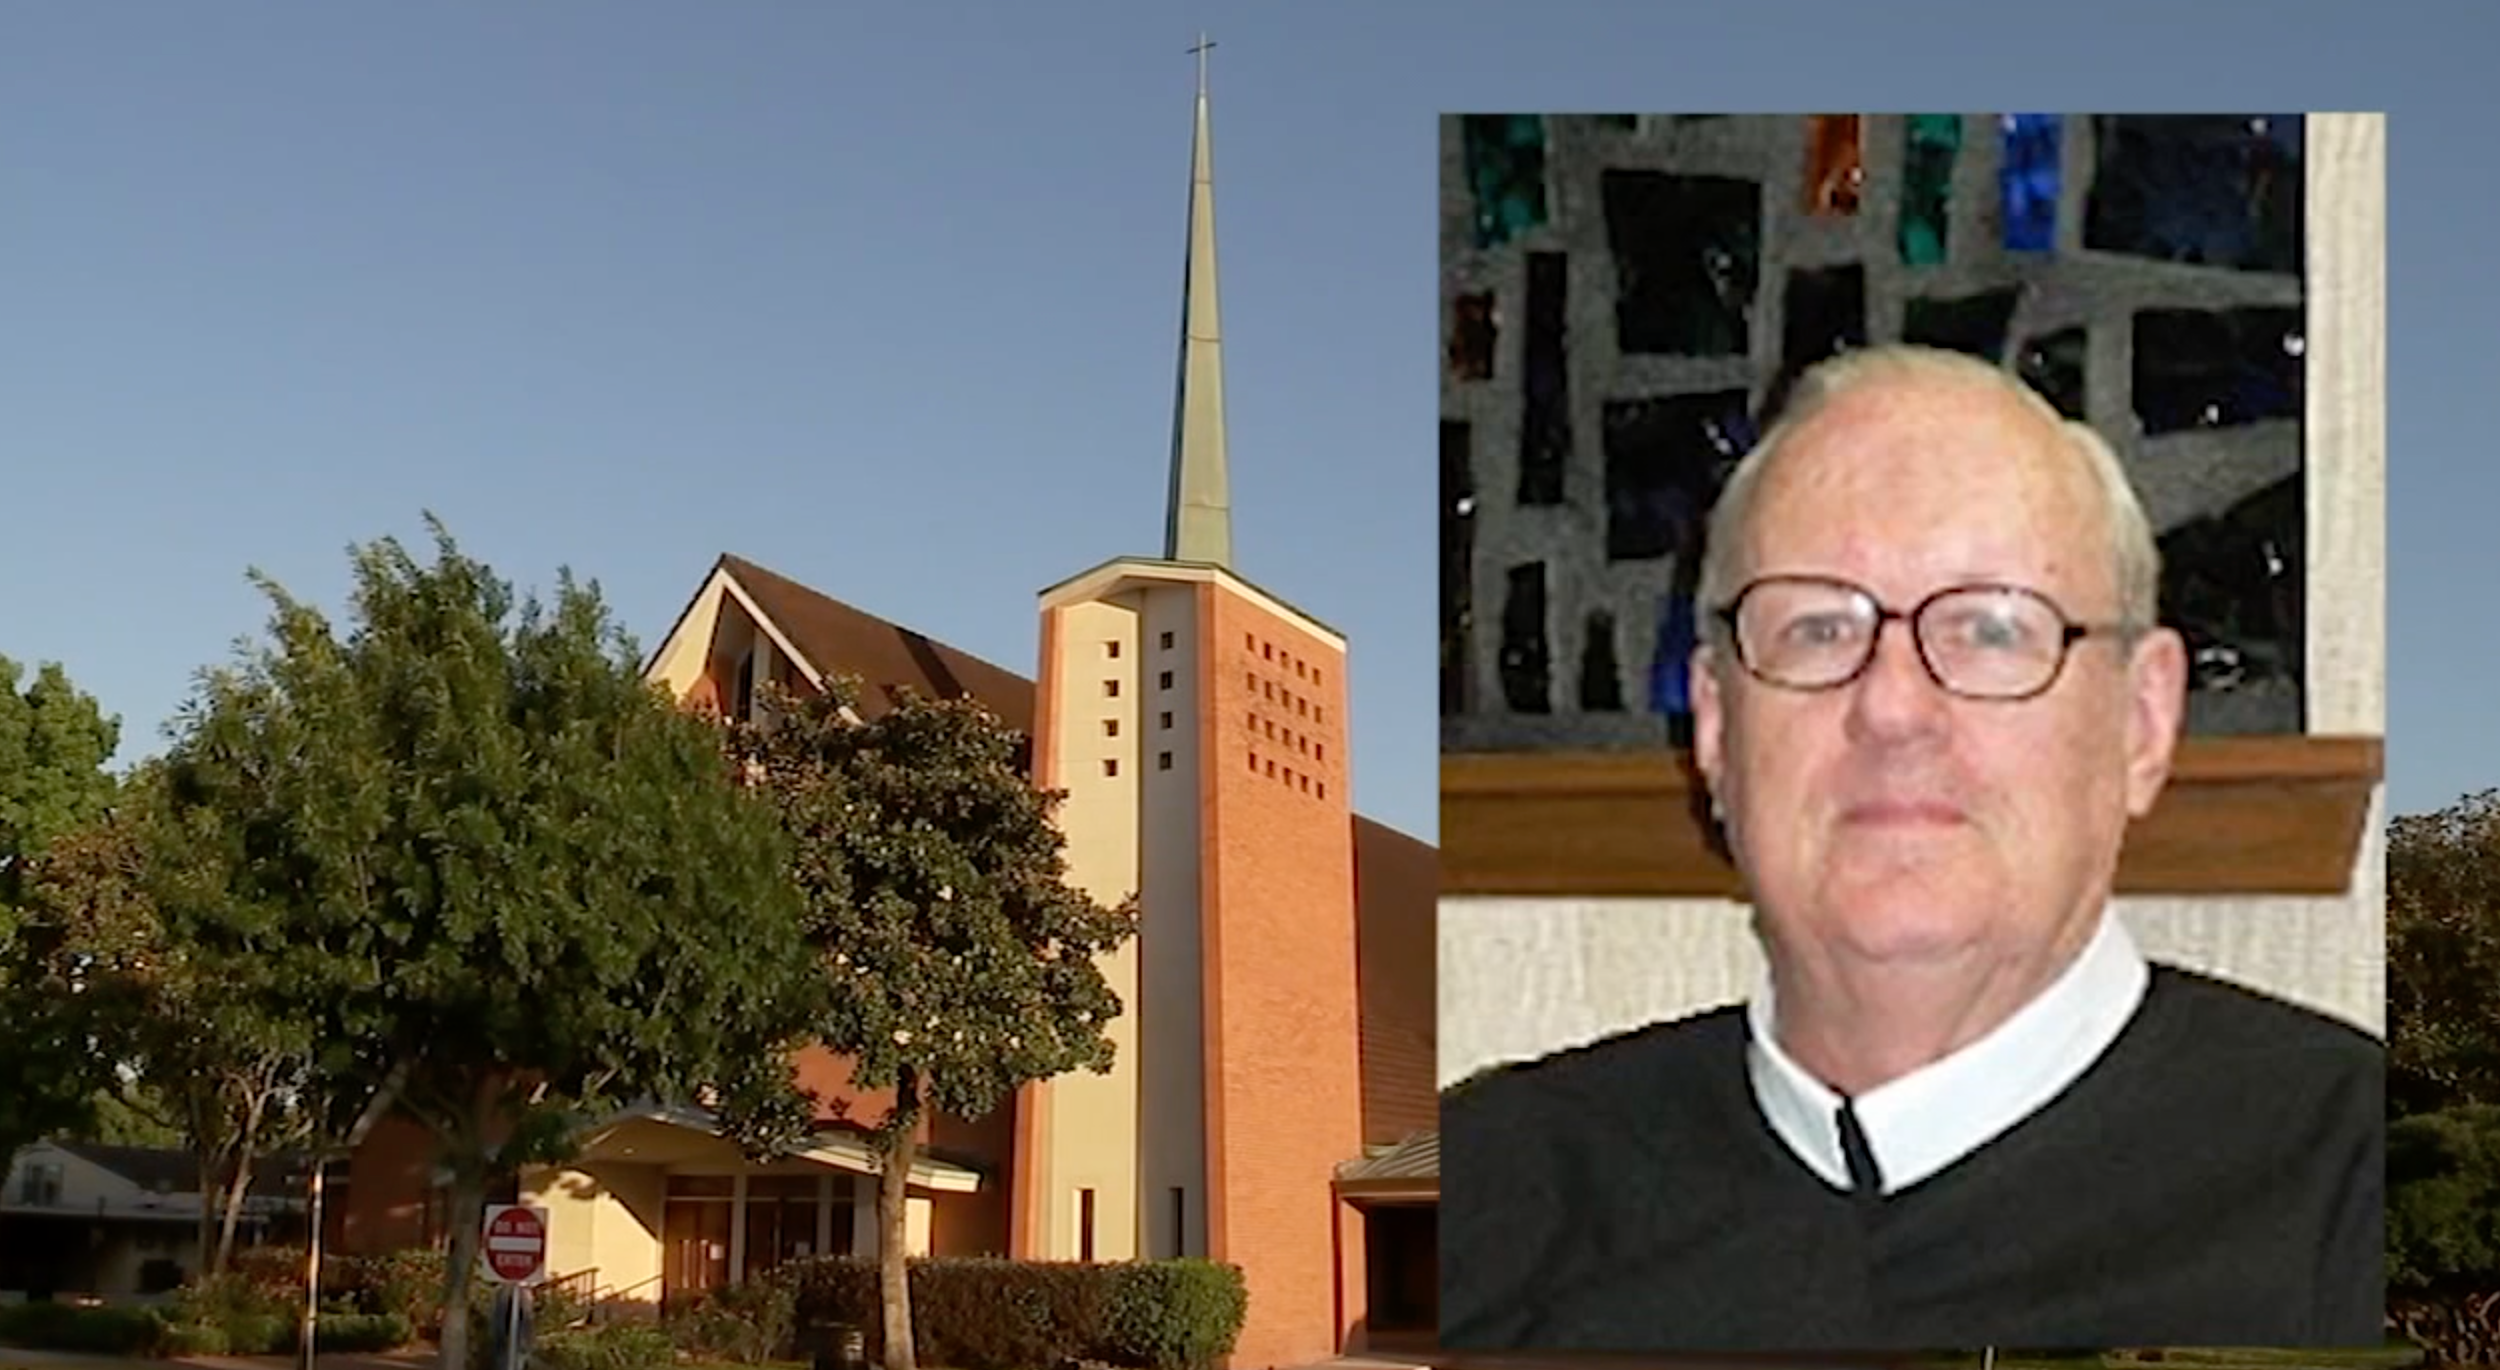 A Texas church ceased all services after its priest, reverent Donnell Kirchner, died of what is believed to be Covid-19